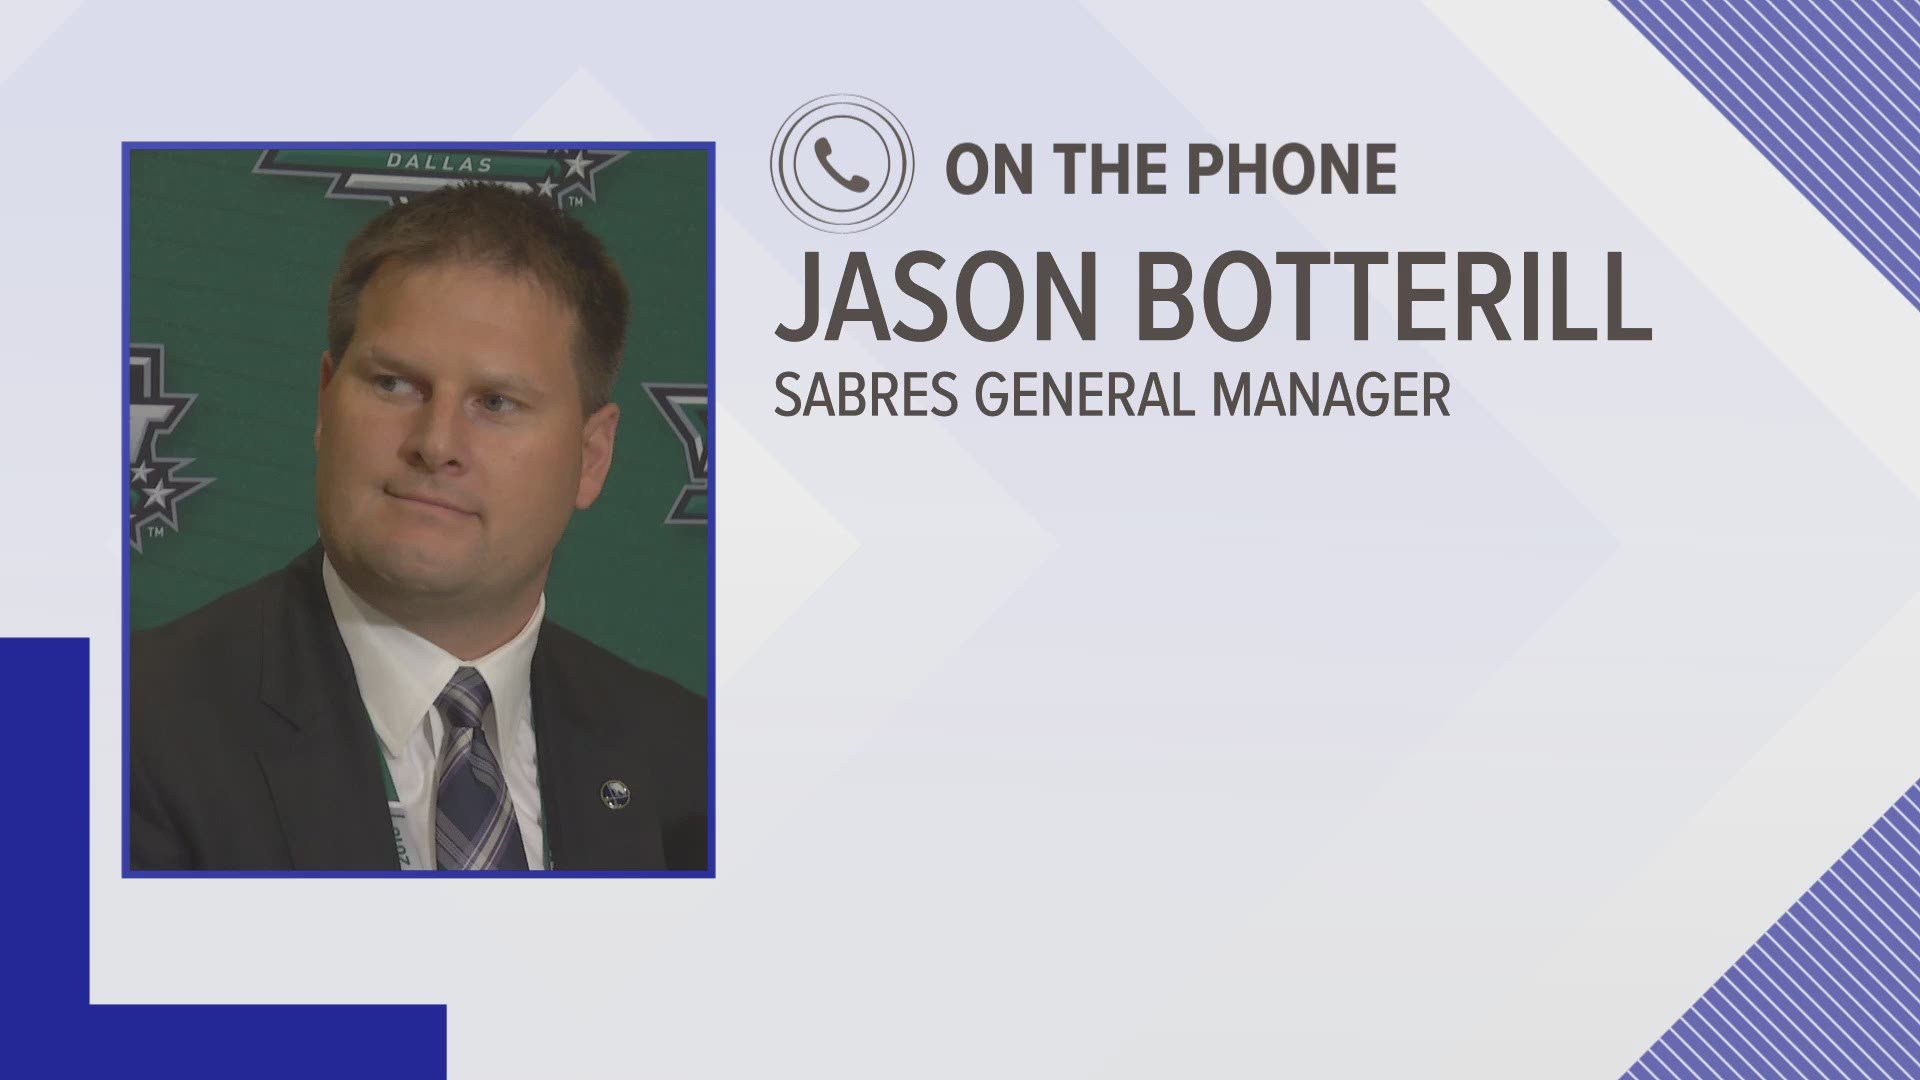 Sabres GM Jason Botterill continues to reshape the Sabres roster. He's working hard to change the culture. Here are his comments on the Ryan O'Reilly trade to St. Louis.